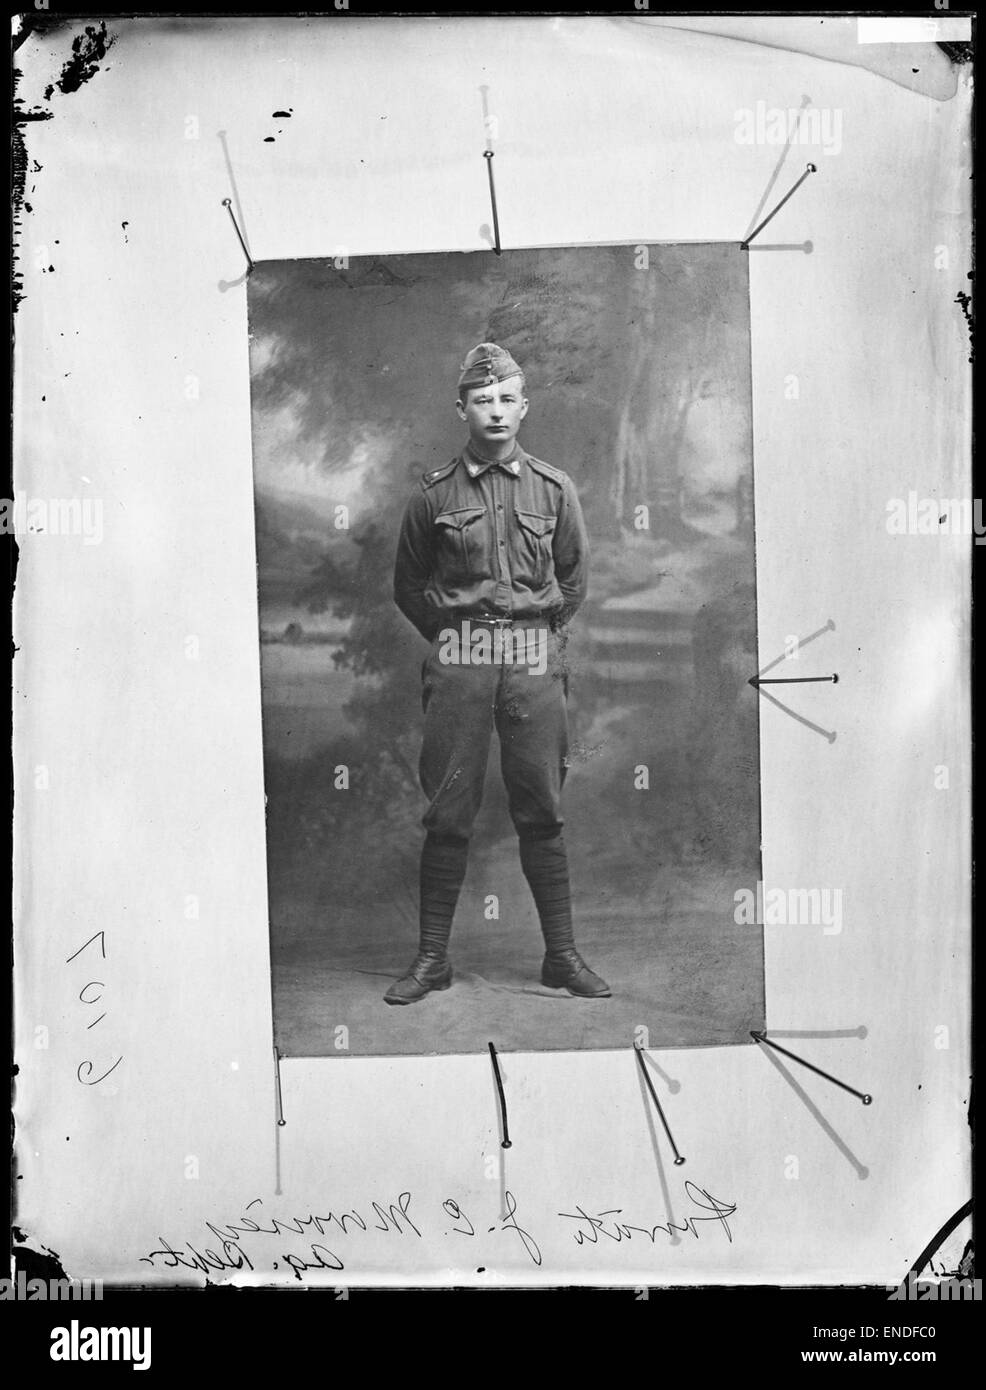 Private J.C. Morrisey - Deceased soldiers, Agriculture Department Stock Photo